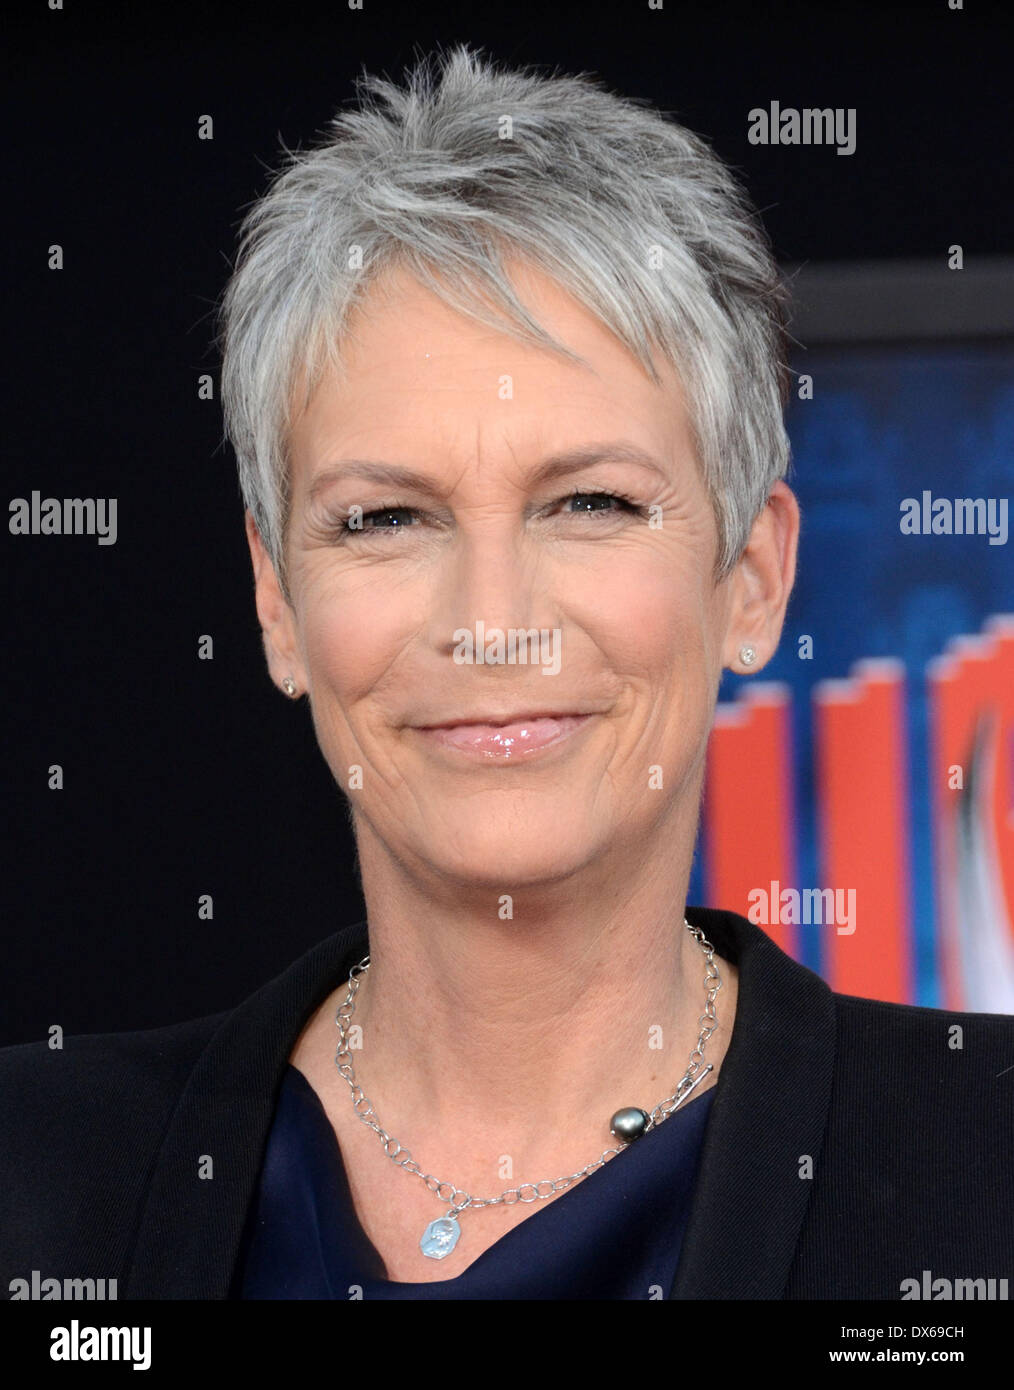 Jamie Lee Curtis The Los Angeles Premiere of 'Wreck-It Ralph' - Arrivals  Los Angeles, California  Featuring: Jamie Le Stock Photo - Alamy